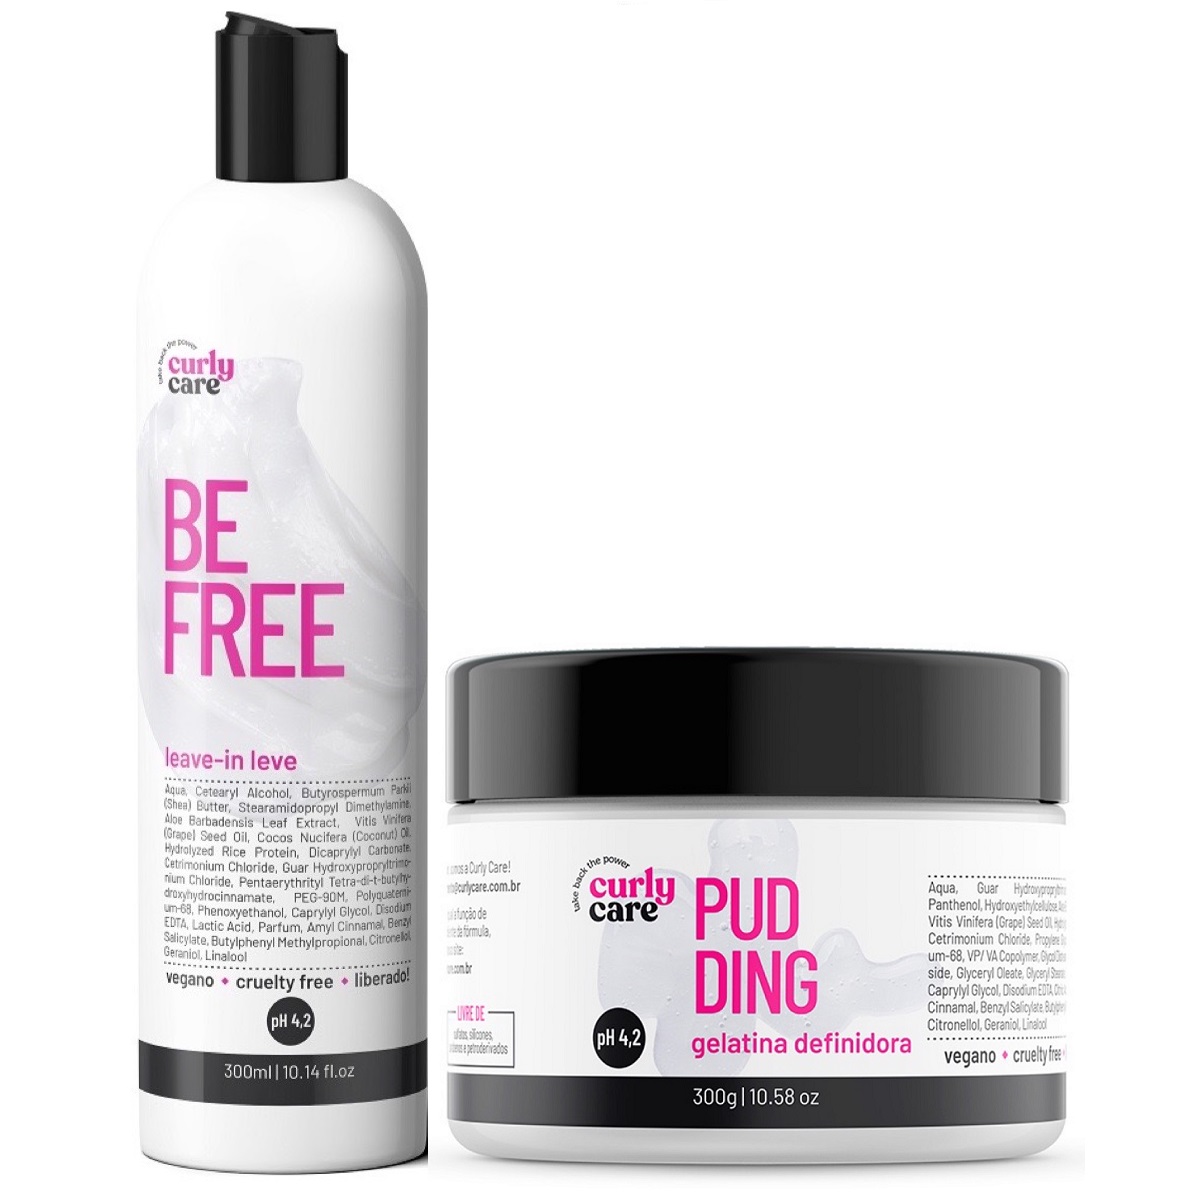 Kit Curly Care Pudding Gelatina E Be Free Leave-in Leve